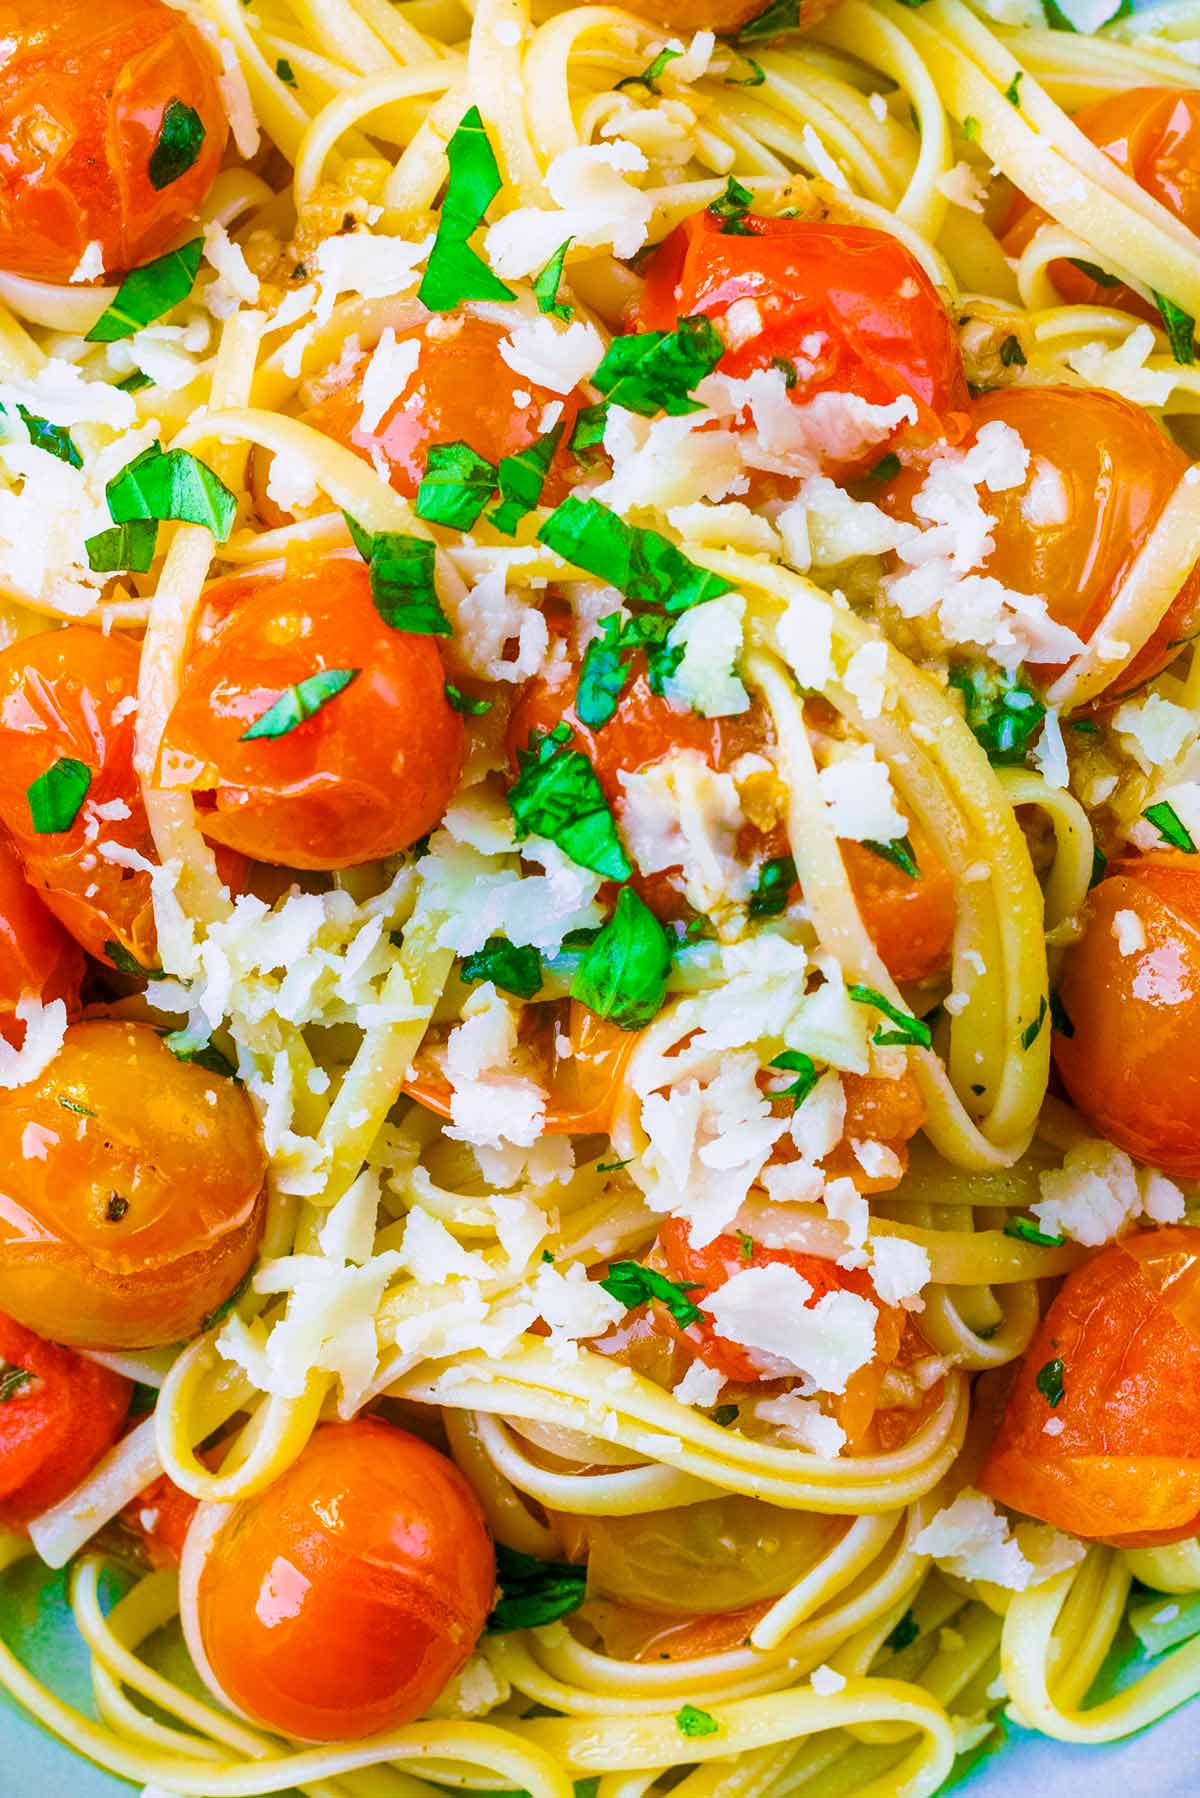 Cherry tomatoes mixed with linguine, chopped basil and shavings of Parmesan.